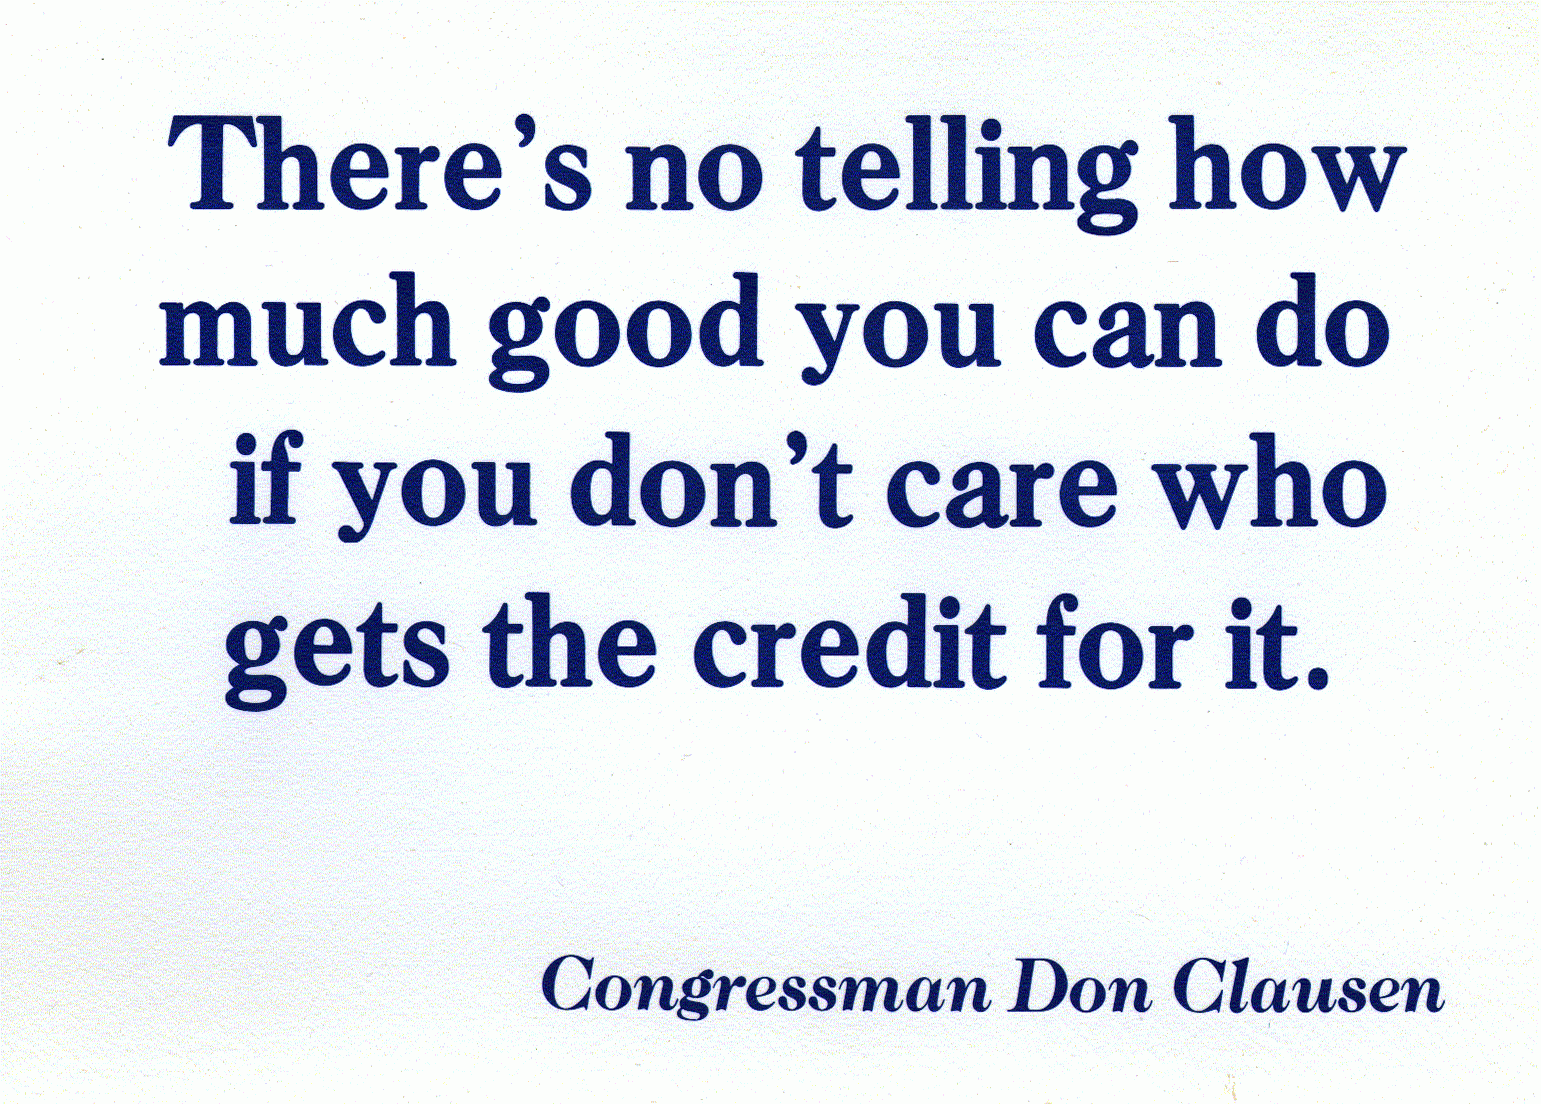 A quote by Don Clausen